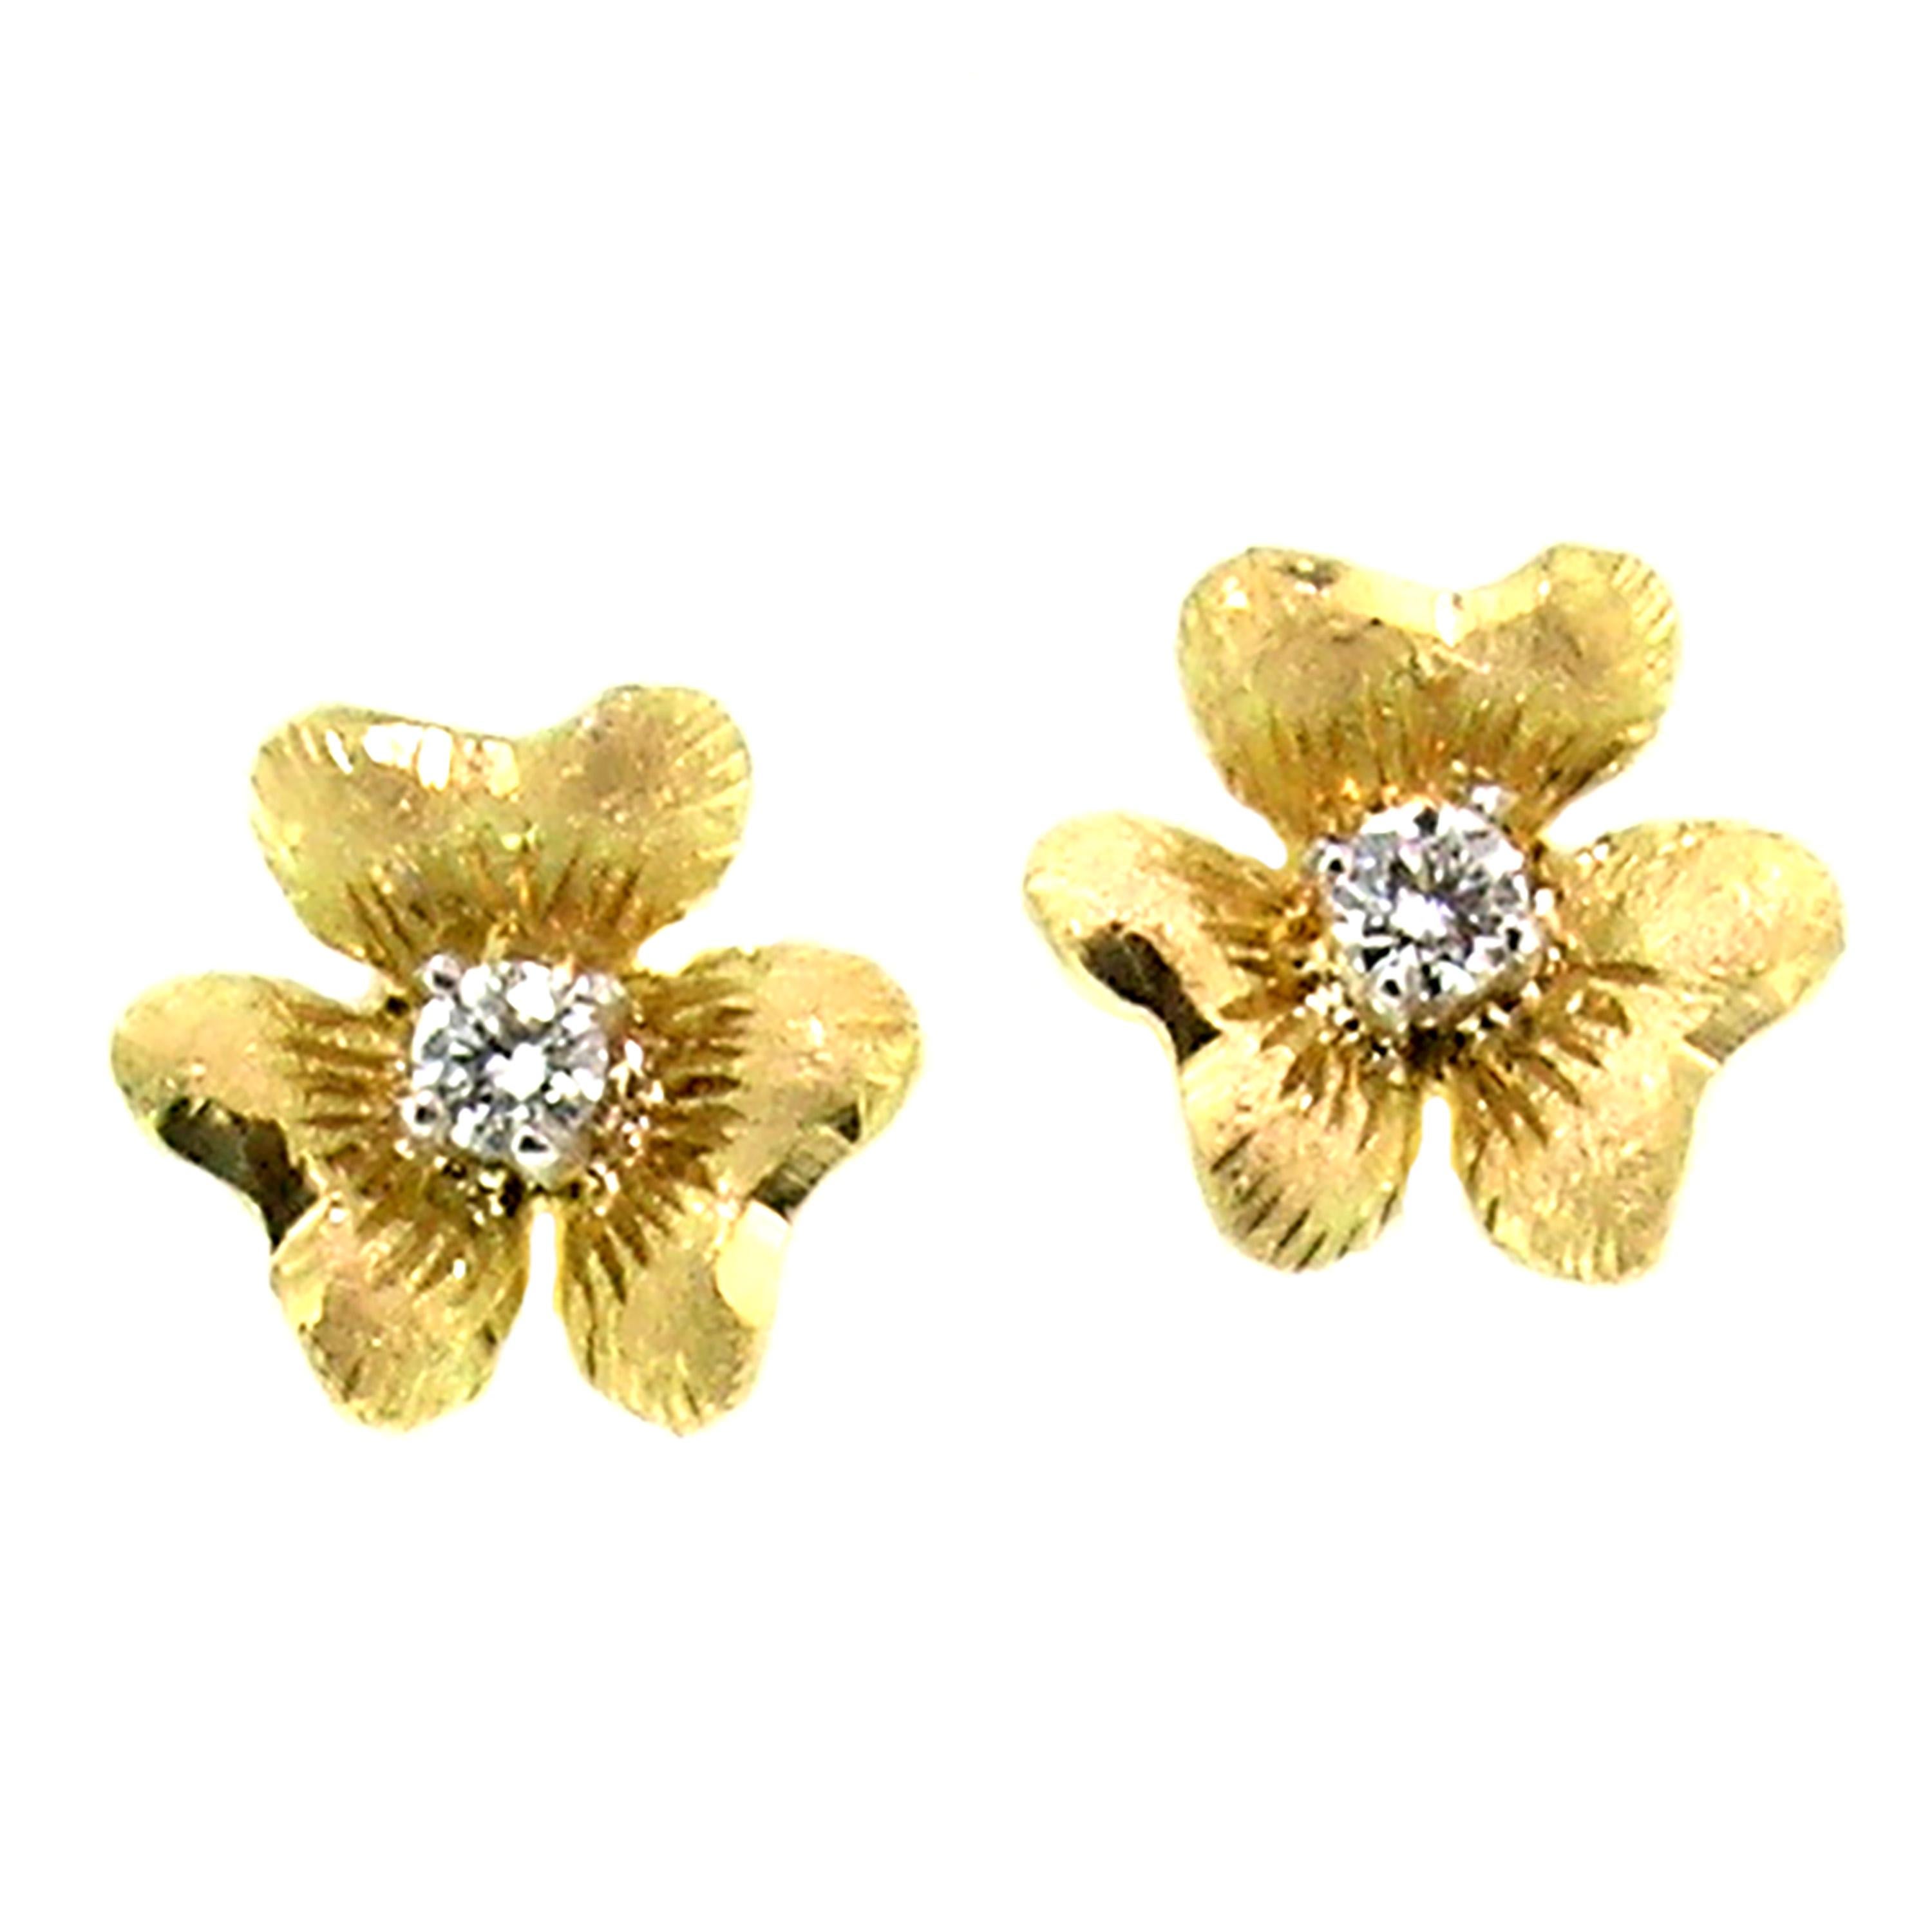 These sweet Floral stud earrings are hand engraved with a richly detailed Florentine finish.  They are a sculpted, three-dimensional shape that sits beautifully on the ear, and each is set with a high quality diamond (with a total weight of 0.06ct).